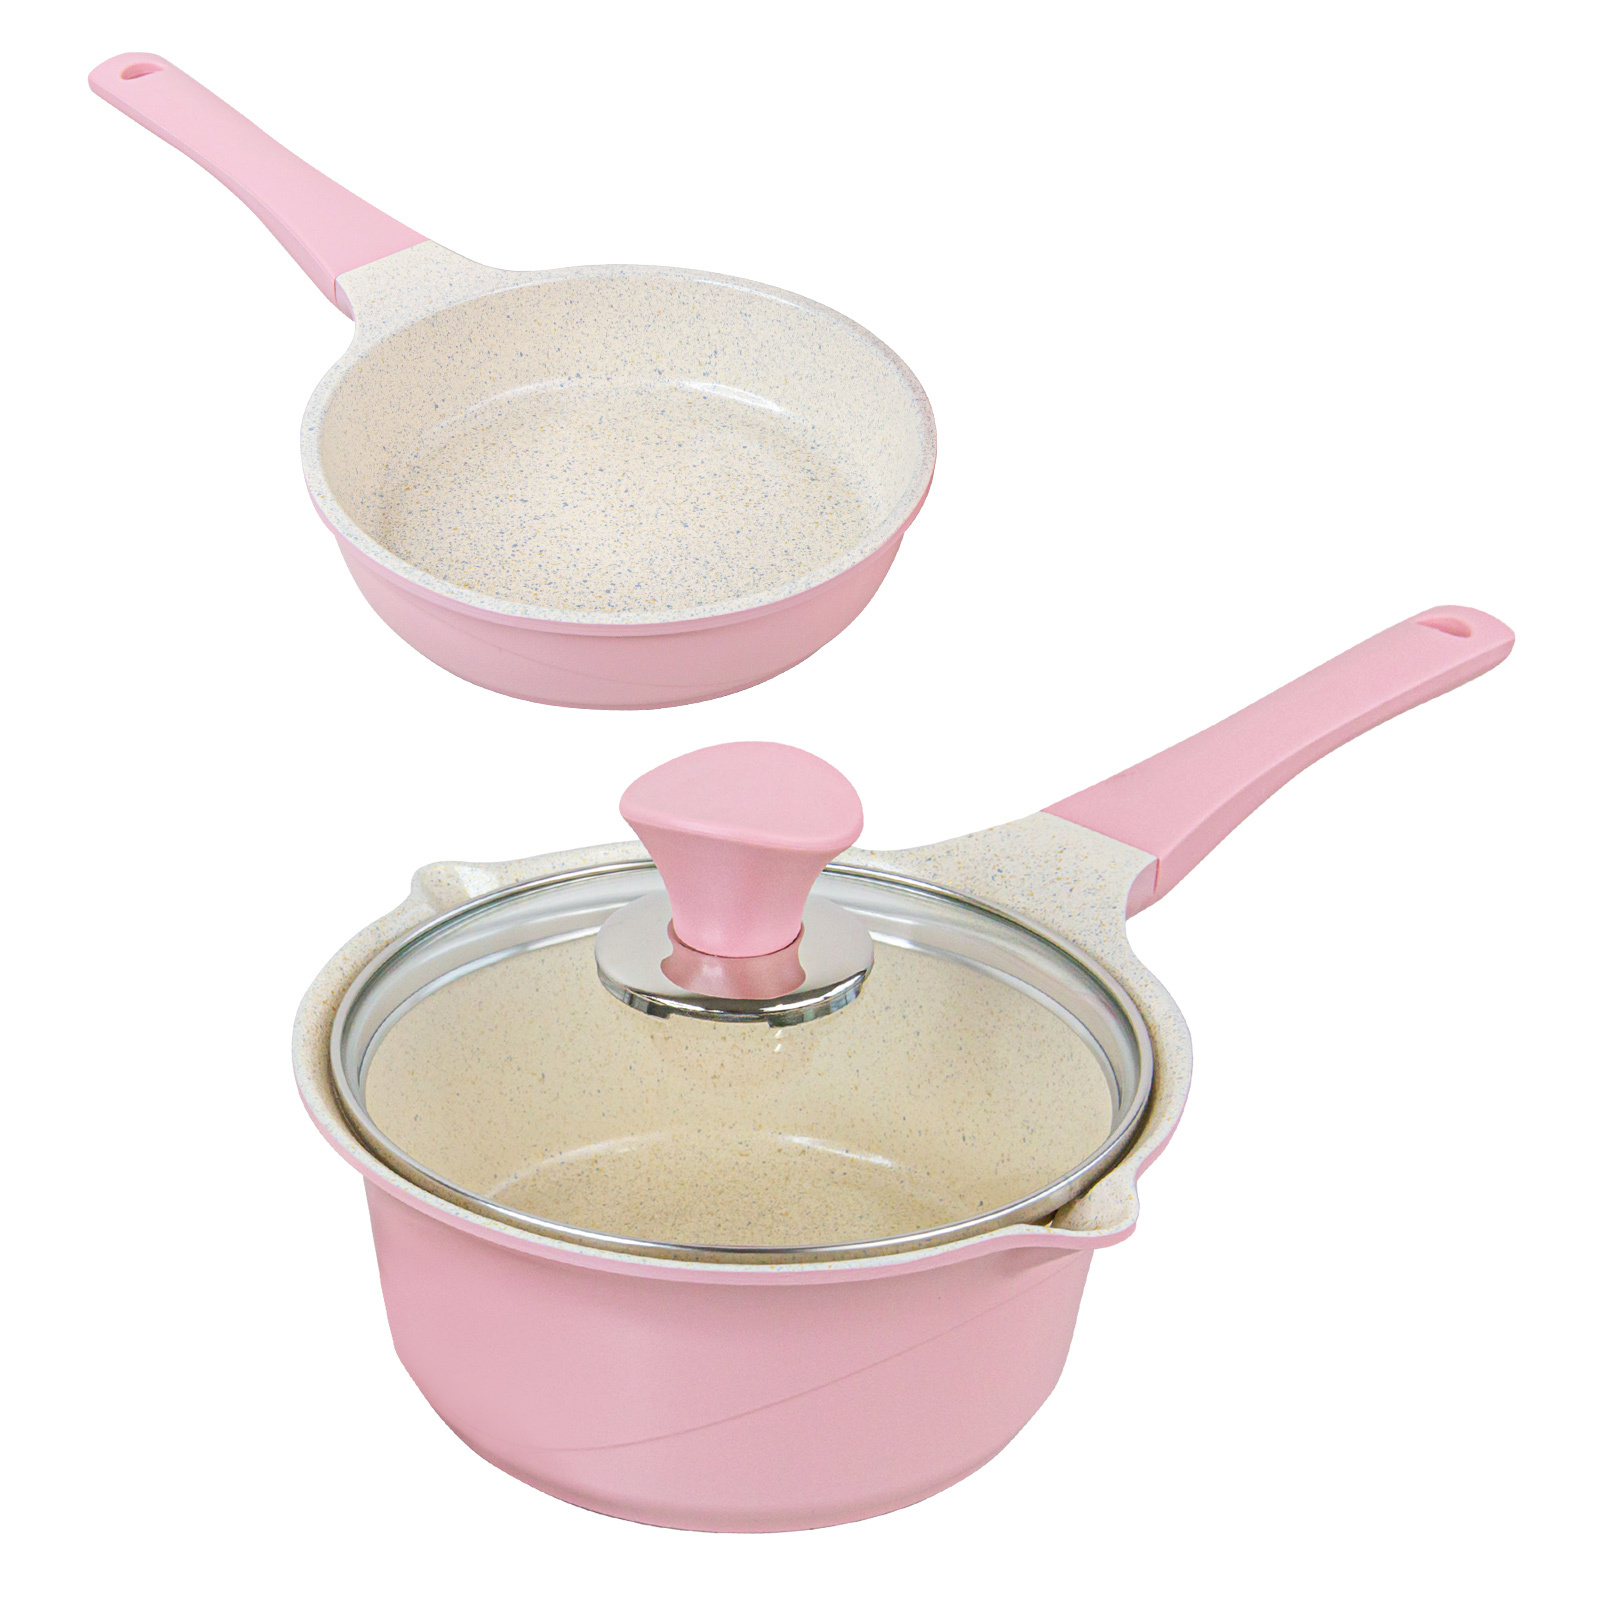 16cm Sauce Pot and Stone Frypan with a Lid - PINK